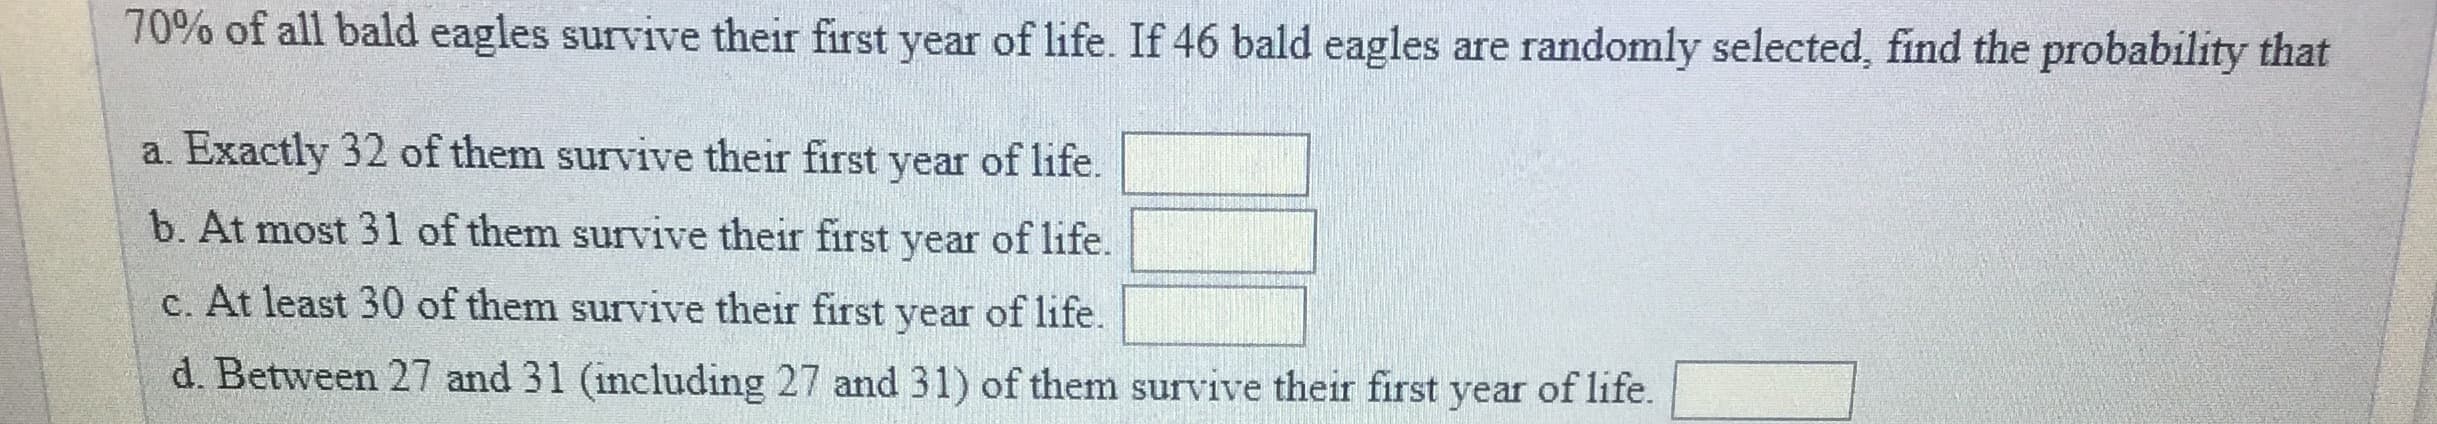 70% of all bald eagles survive their first year of life. If 46 bald eagles are randomly selected, find the probability that
a. Exactly 32 of them survive their first year of life.
b. At most 31 of them survive their first year of life.
c. At least 30 of them survive their first year of life.
d. Between 27 and 31 (including 27 and 31) of them survive their first year of life
